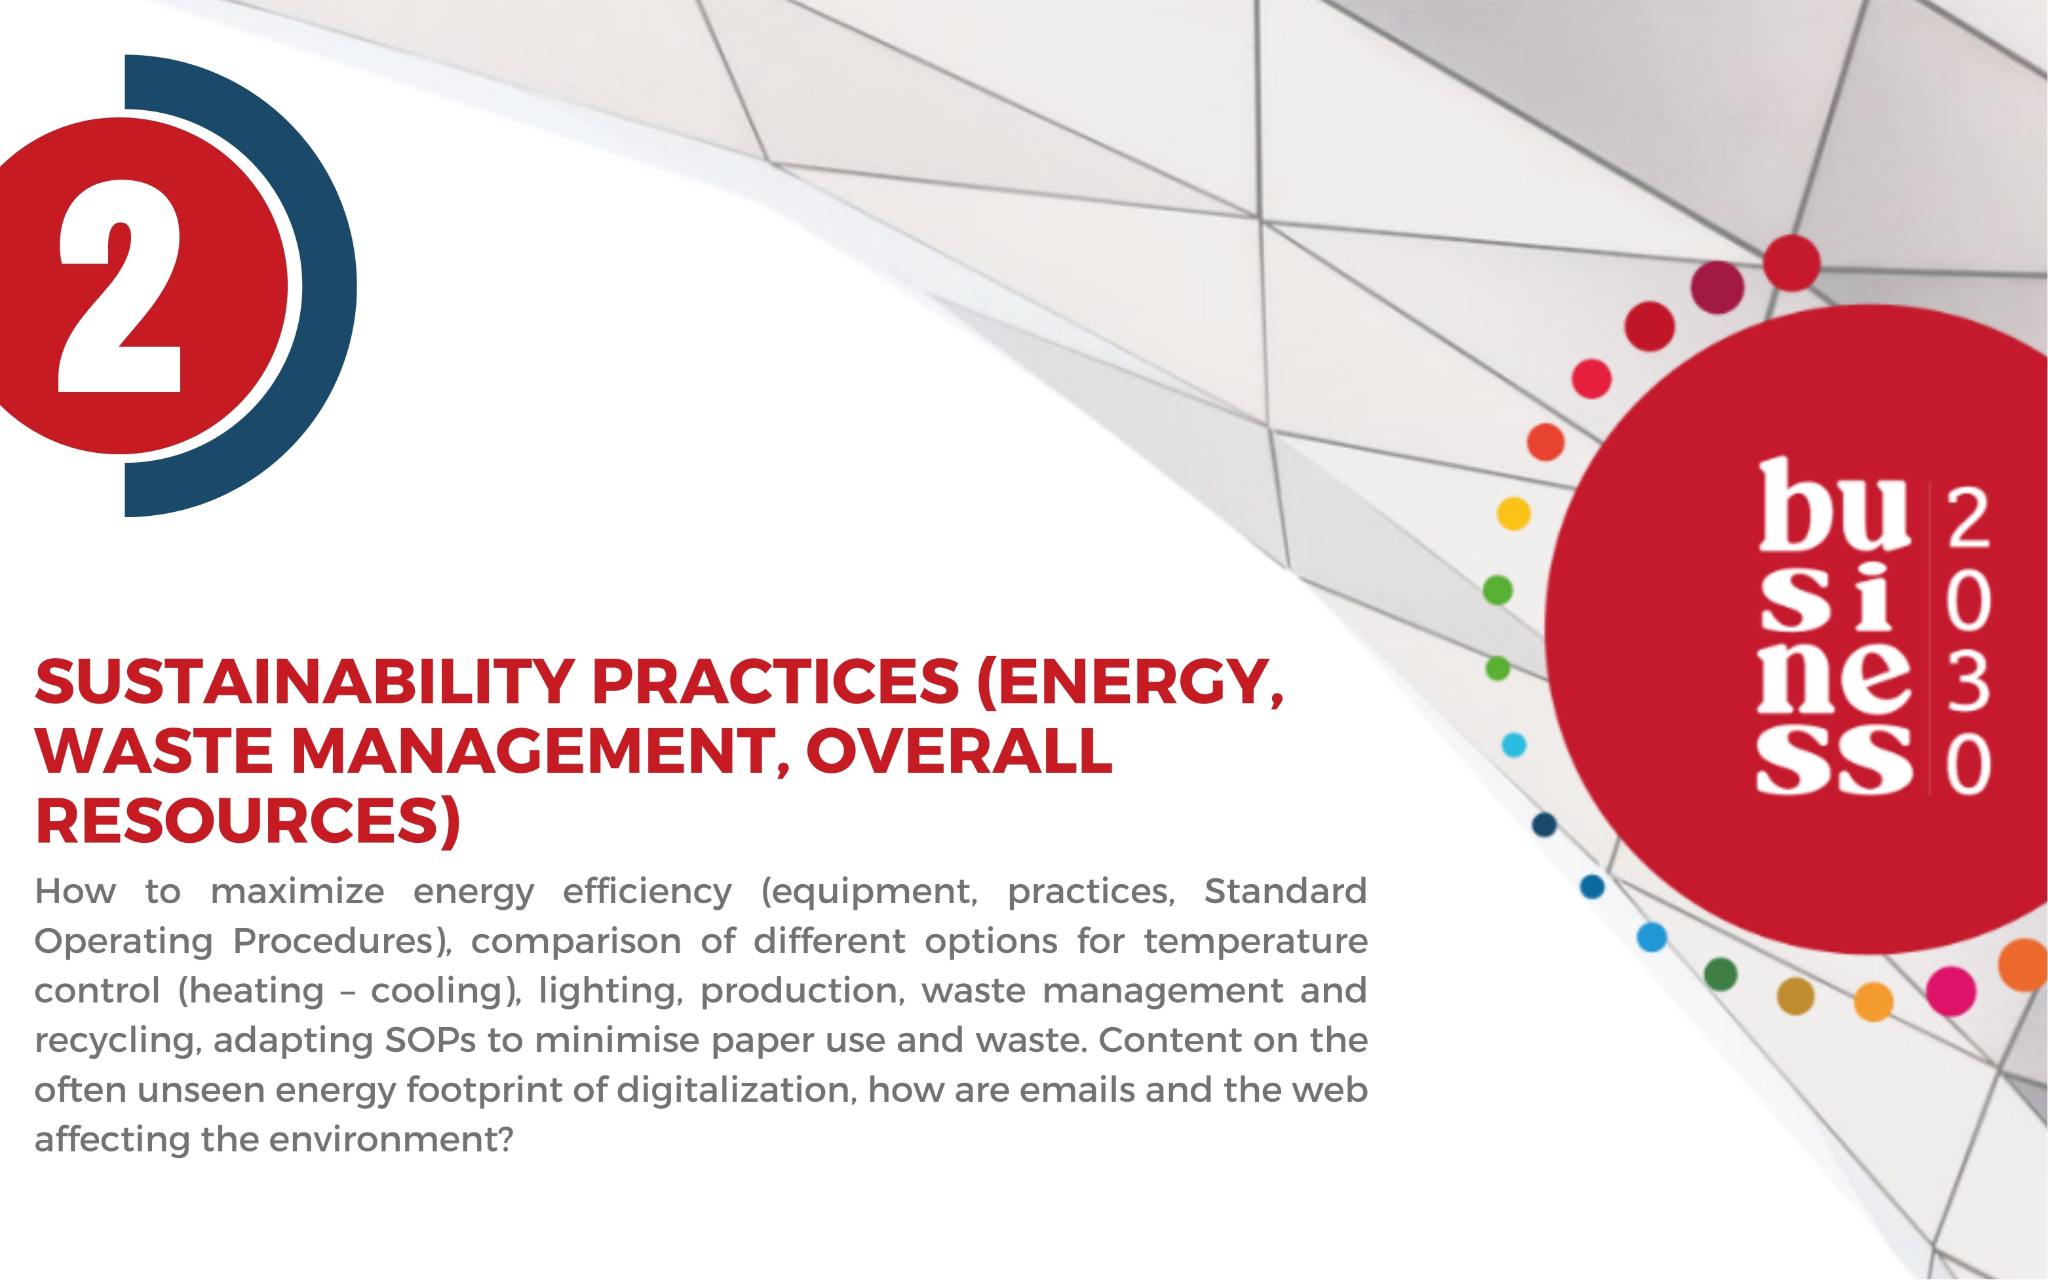 2. Sustainability practices for SMEs (energy, waste, resources)